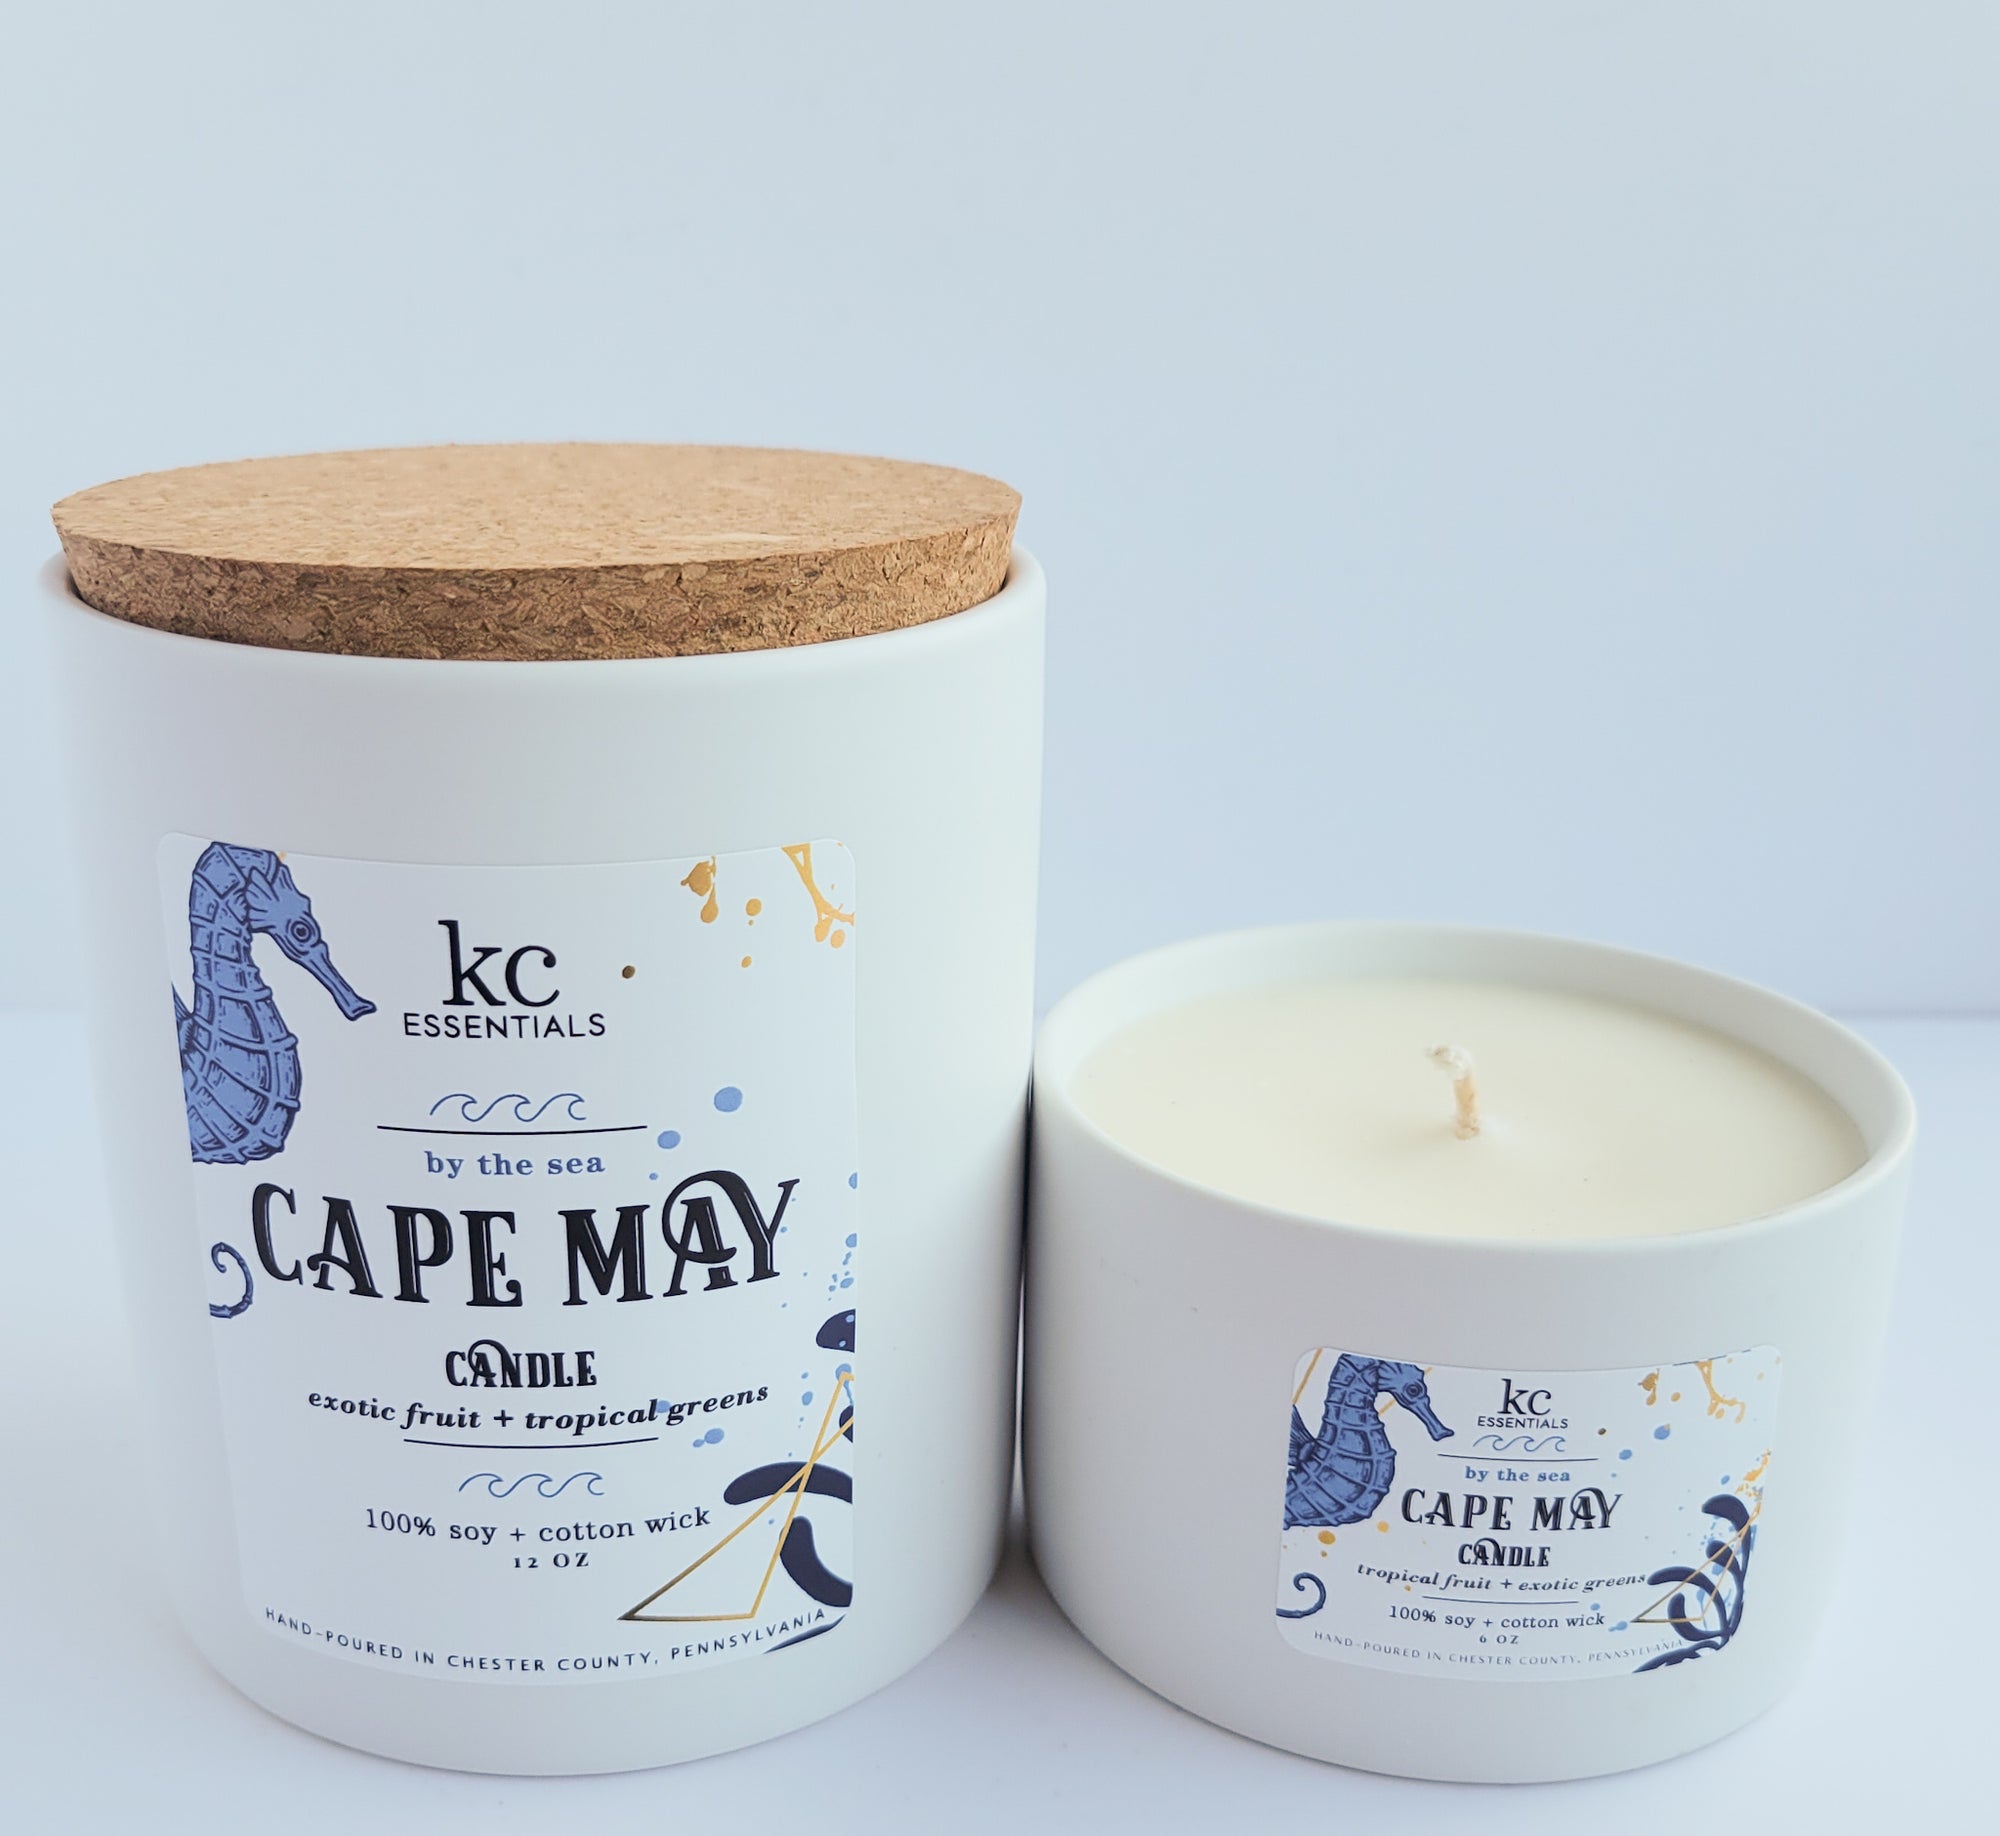 Cape may beach 12 ounce candle made with 100 percent soy, includes cork lid.